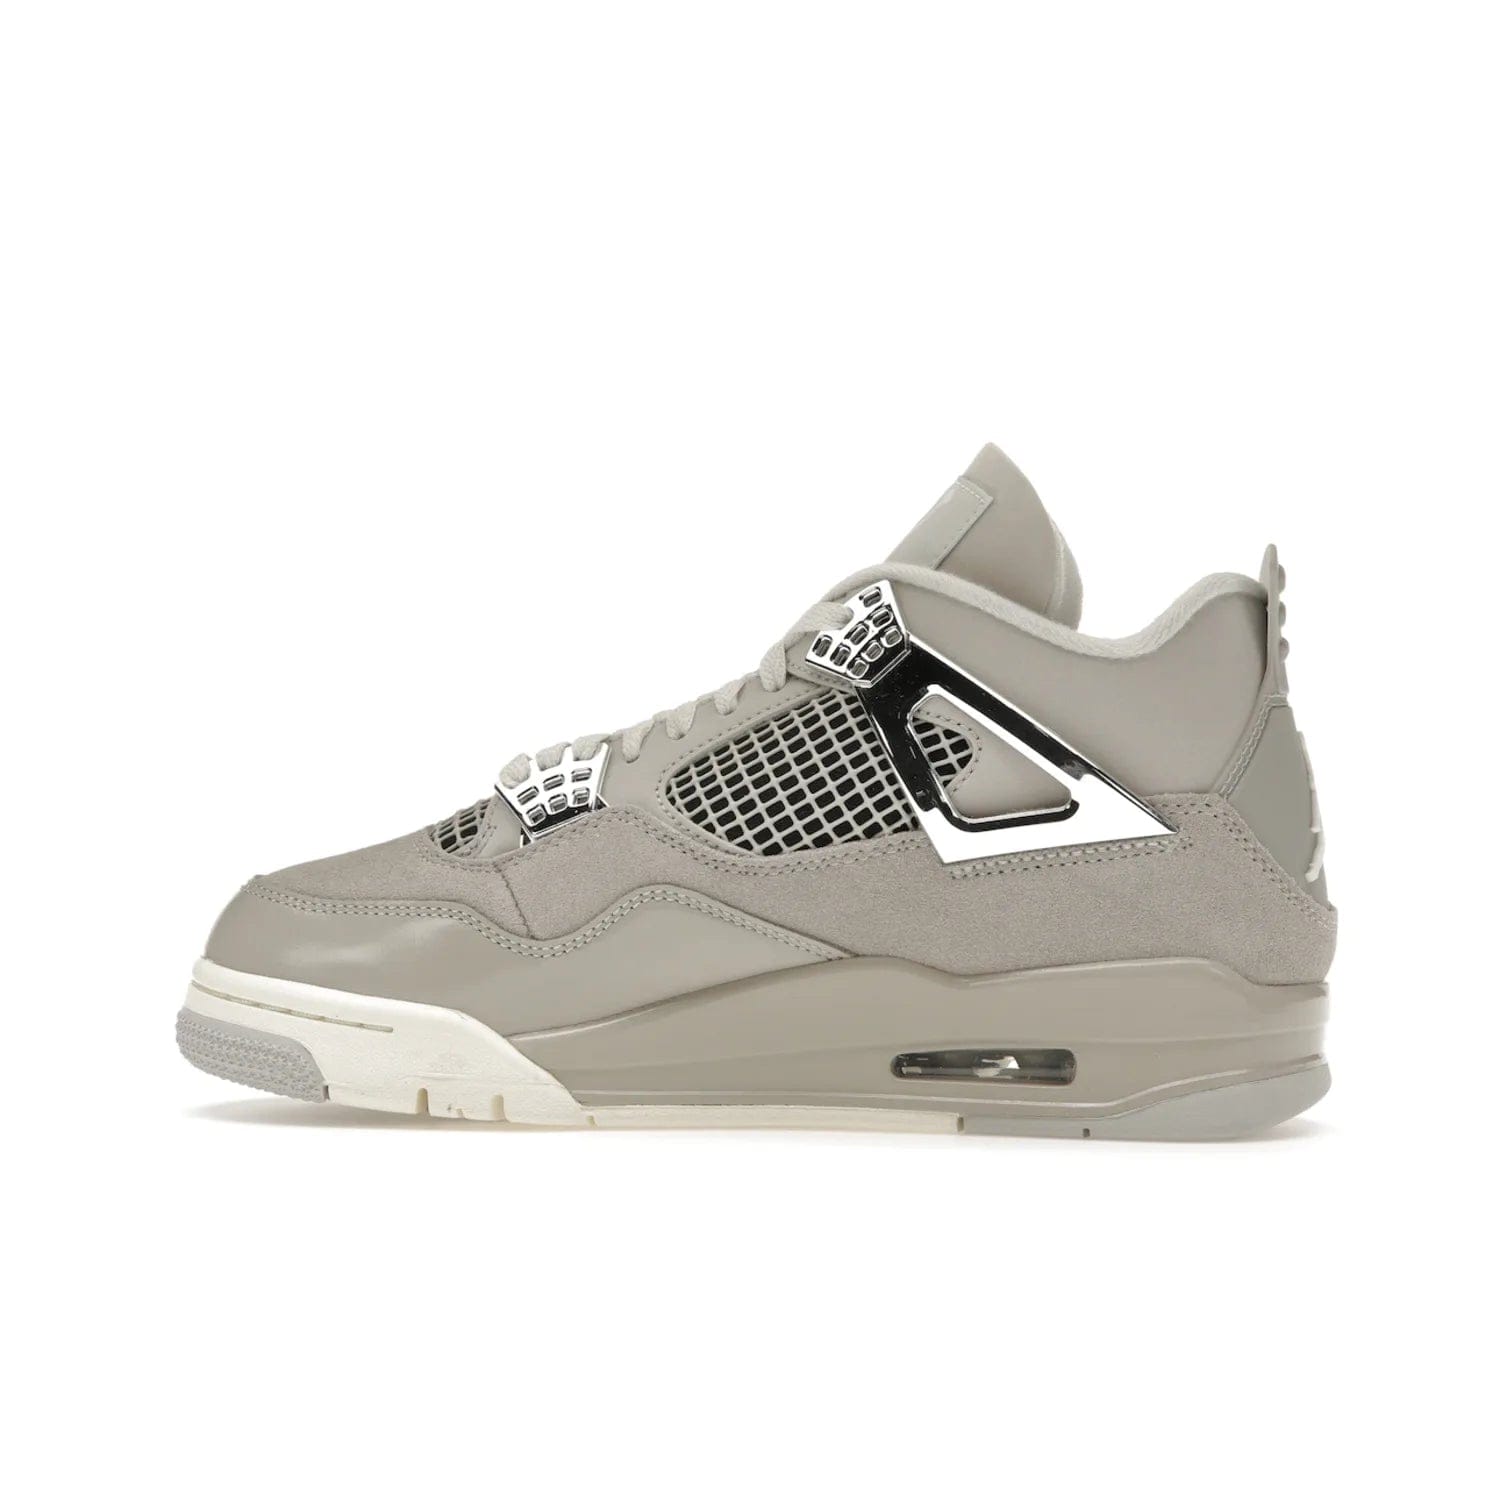 Jordan 4 Retro Frozen Moments (Women's) - Image 20 - Only at www.BallersClubKickz.com - The Jordan 4 Retro Frozen Moments is a stylish blend of classic design elements and modern tones. Featuring suede and leather overlays in a light iron-ore, sail, neutral grey, black, and metallic silver colorway. Get this iconic high-performance sneaker for $210.